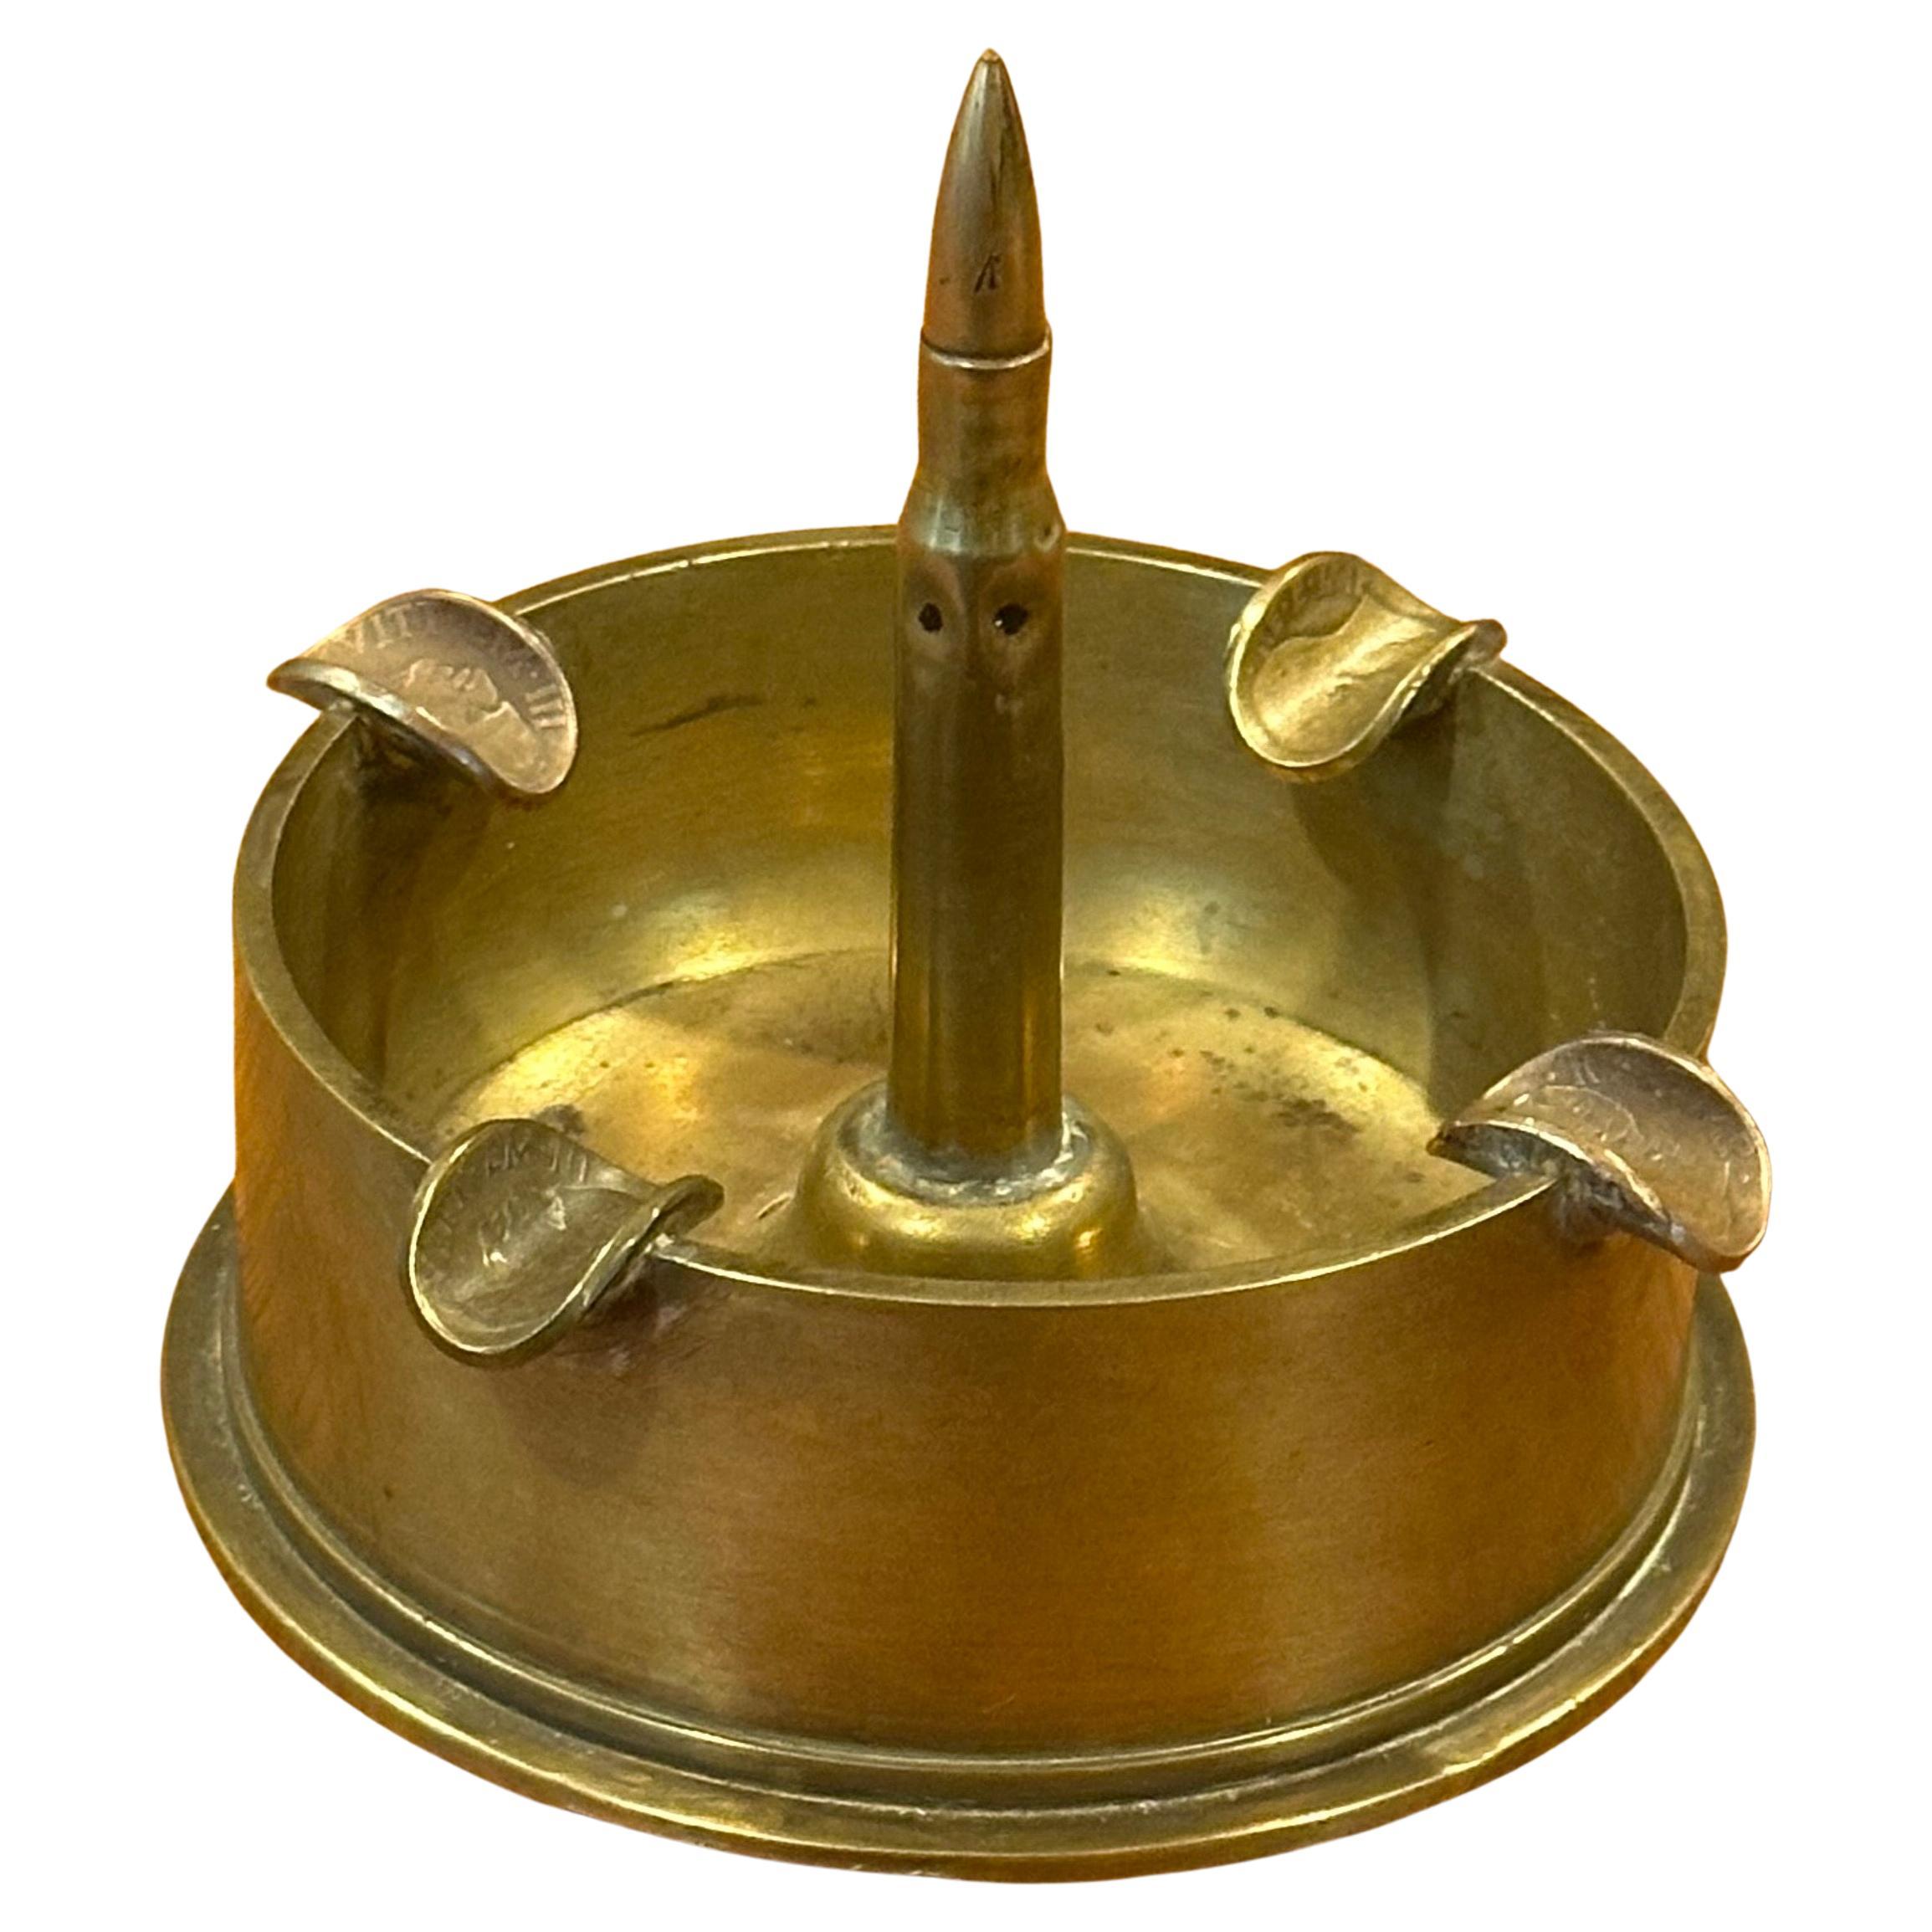 A unique military munition trench art, solid brass with coin slots ashtray, circa 1930s. The piece is in great vintage condition and measures 4.25